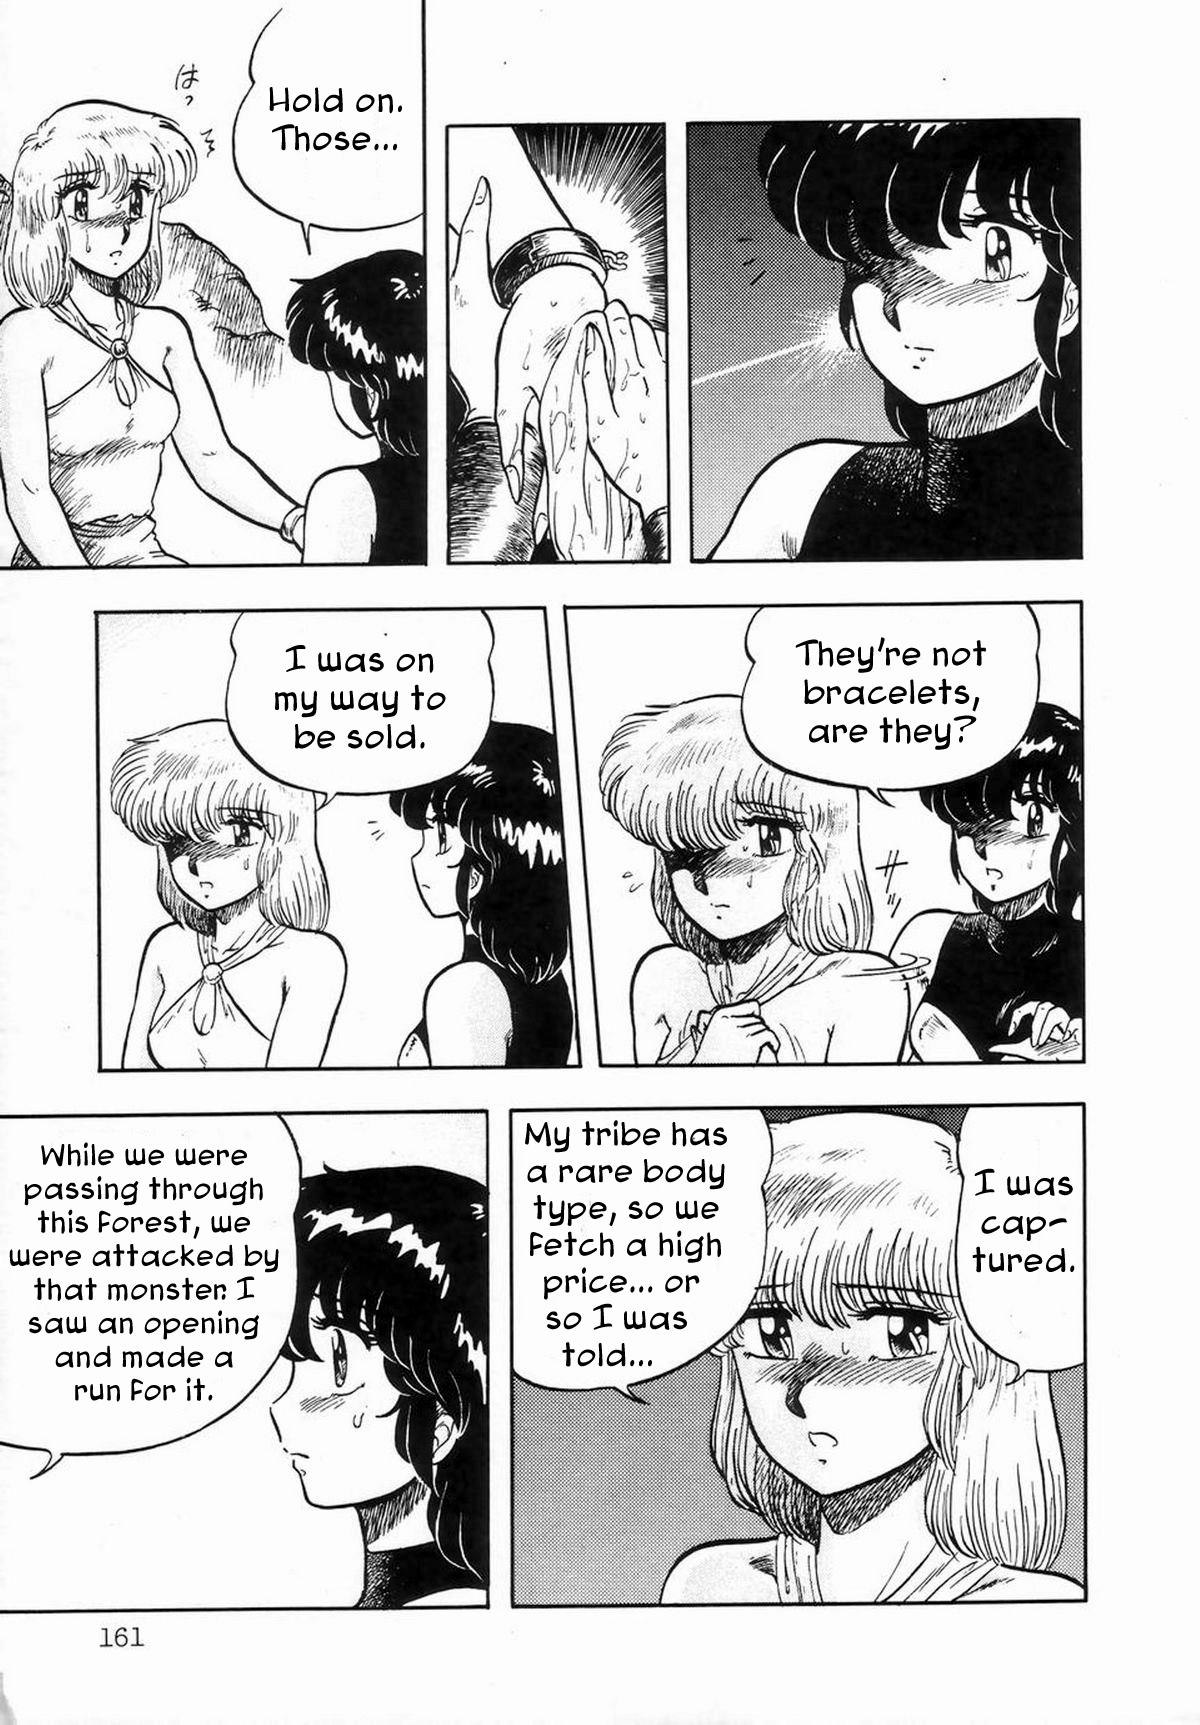 Sylphie Page 7 Of 21 hentai haven, Sylphie Page 7 Of 21 uncensored hentai, Sylp...